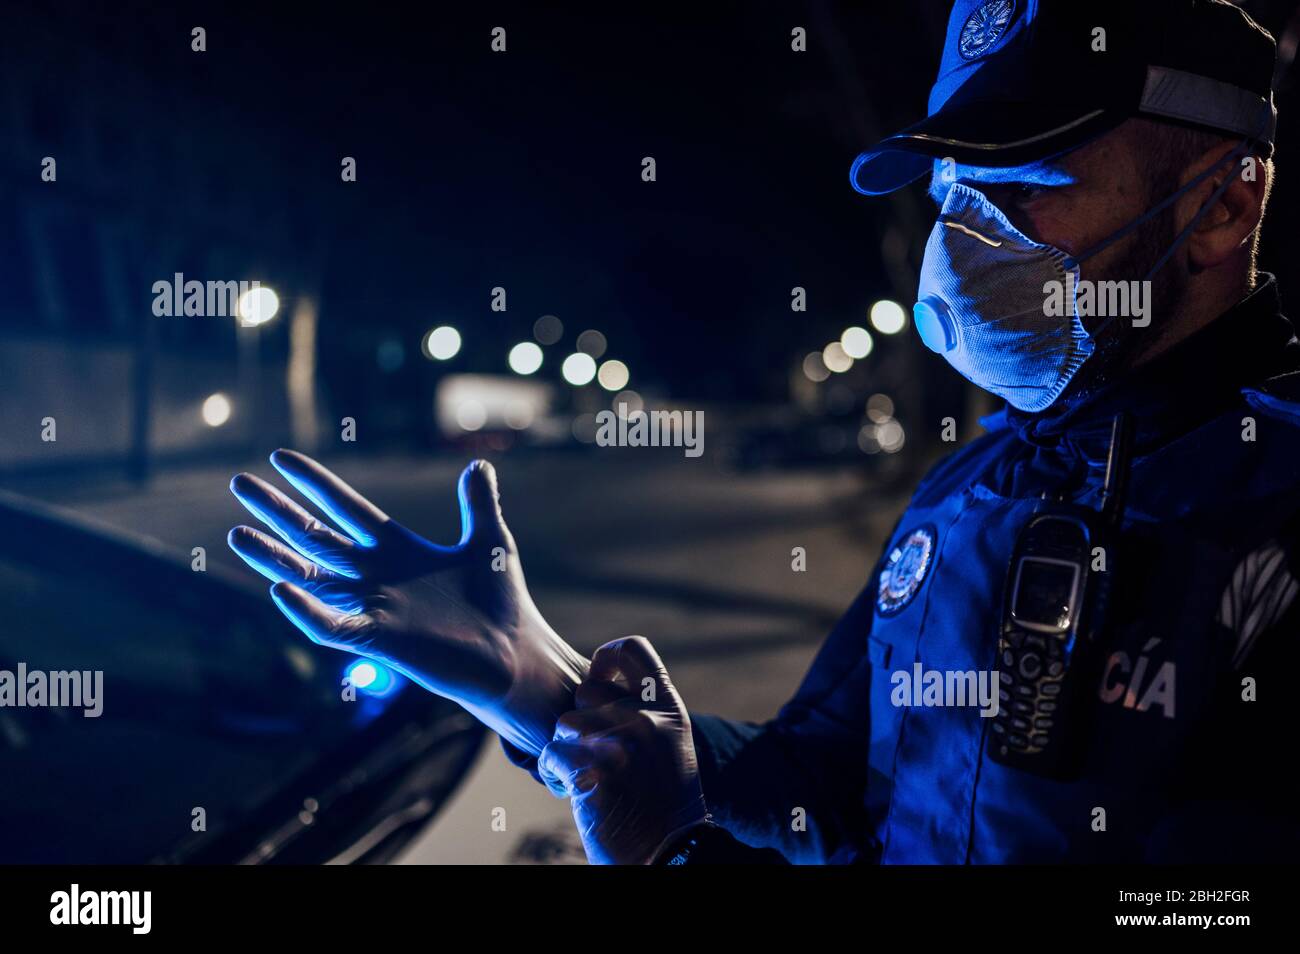 Portrait of policeman wearing mask and protective gloveat night Stock Photo